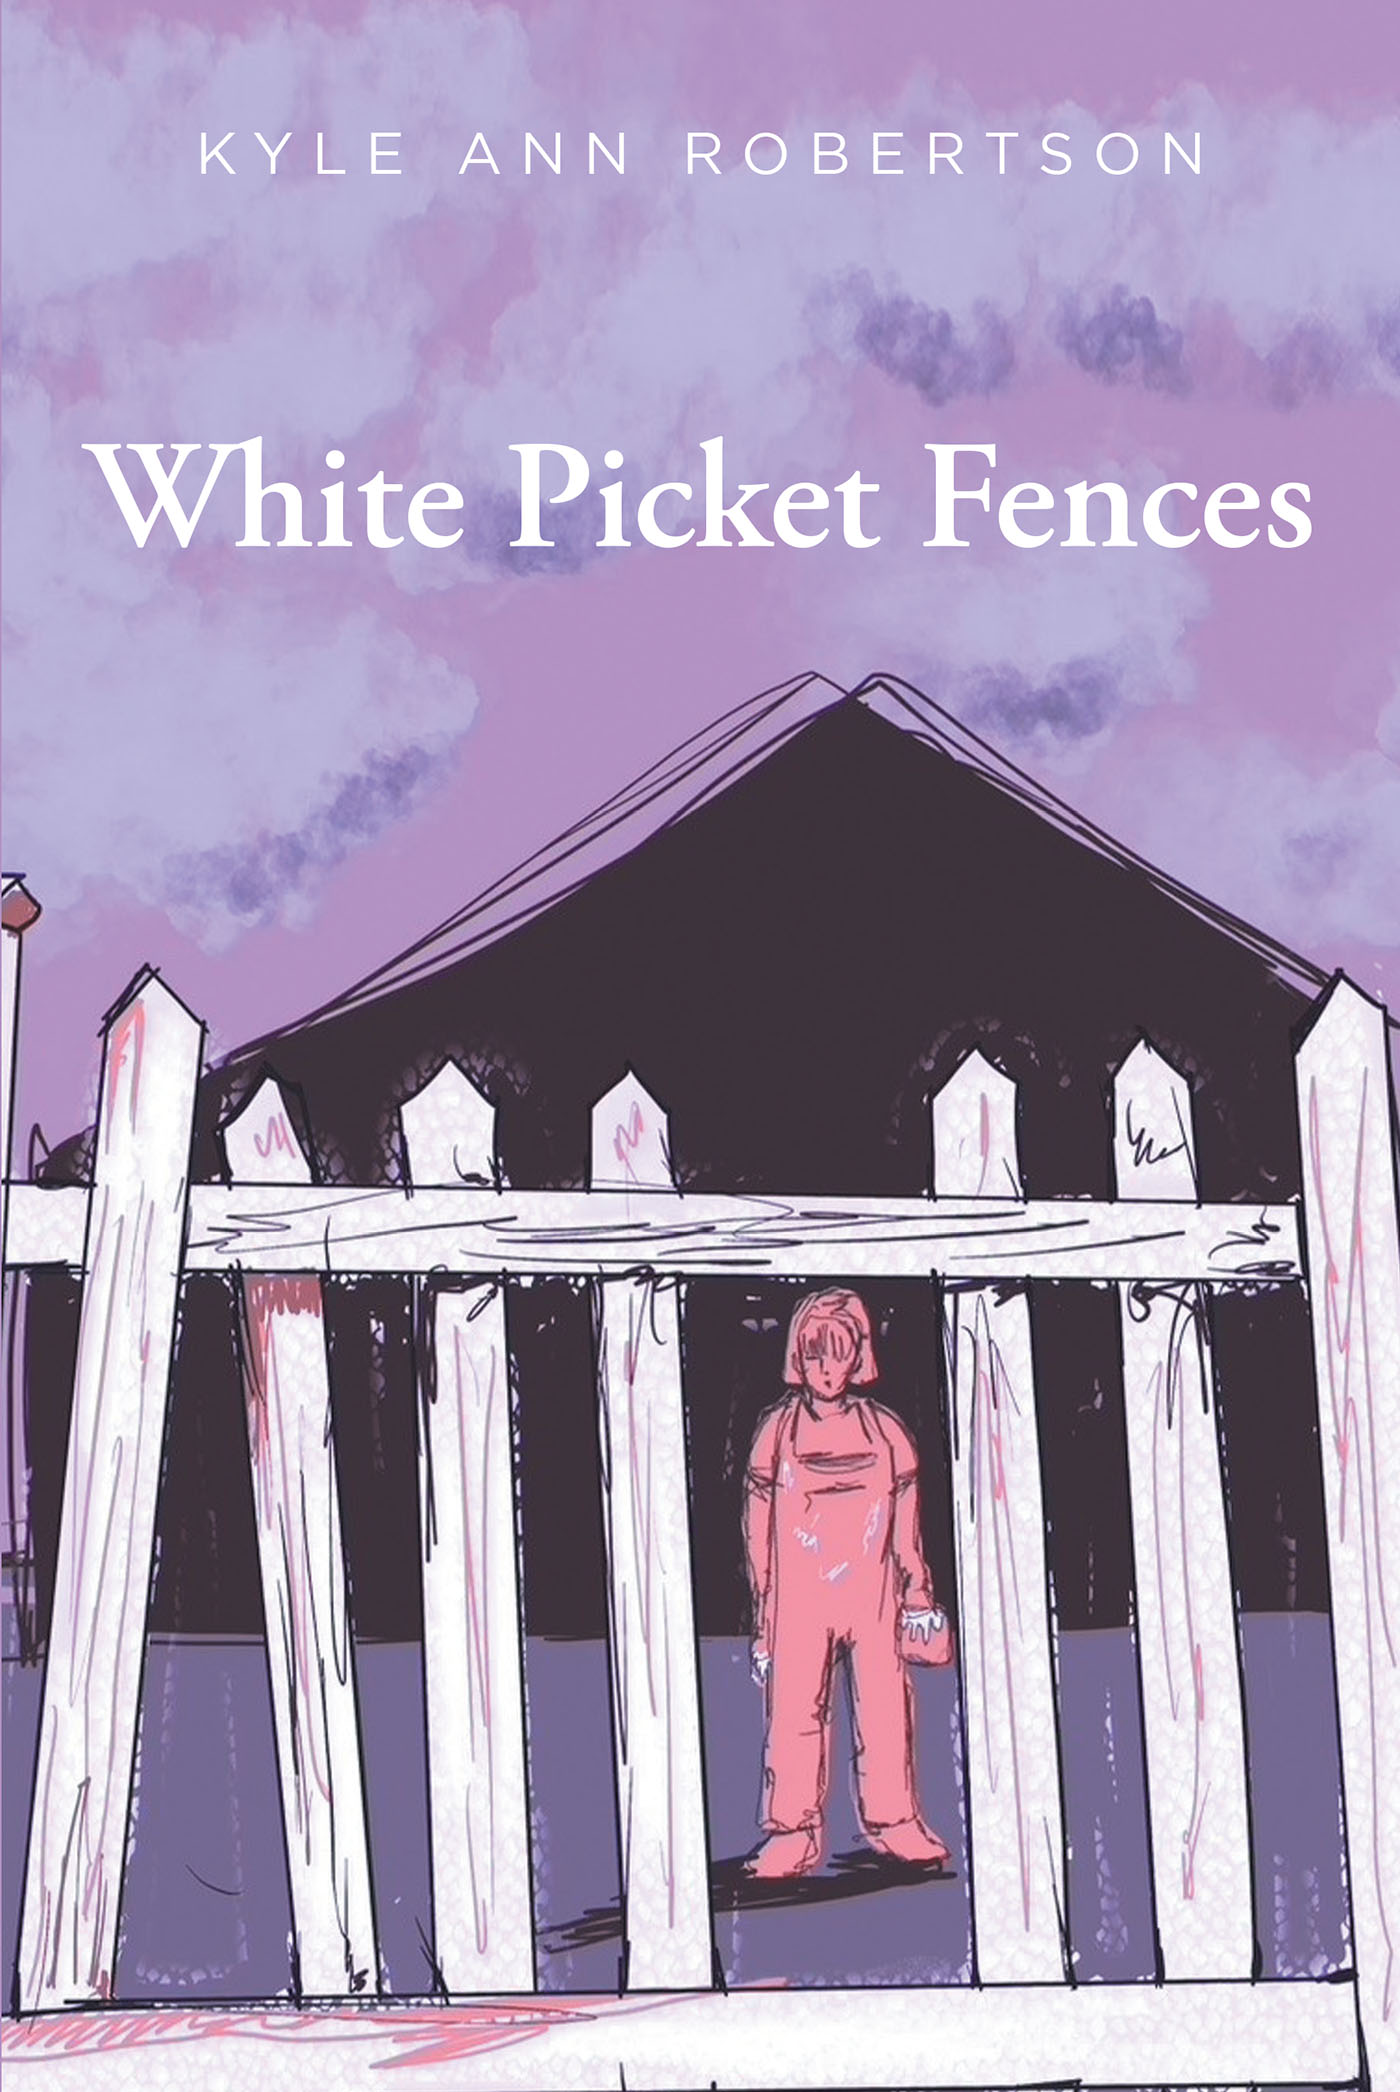 Kyle Ann Robertson’s New Book "White Picket Fences" Follows a Mother Whose Desire to Provide a Life for Her Children She Never Had Ends Up Having Unintended Consequences